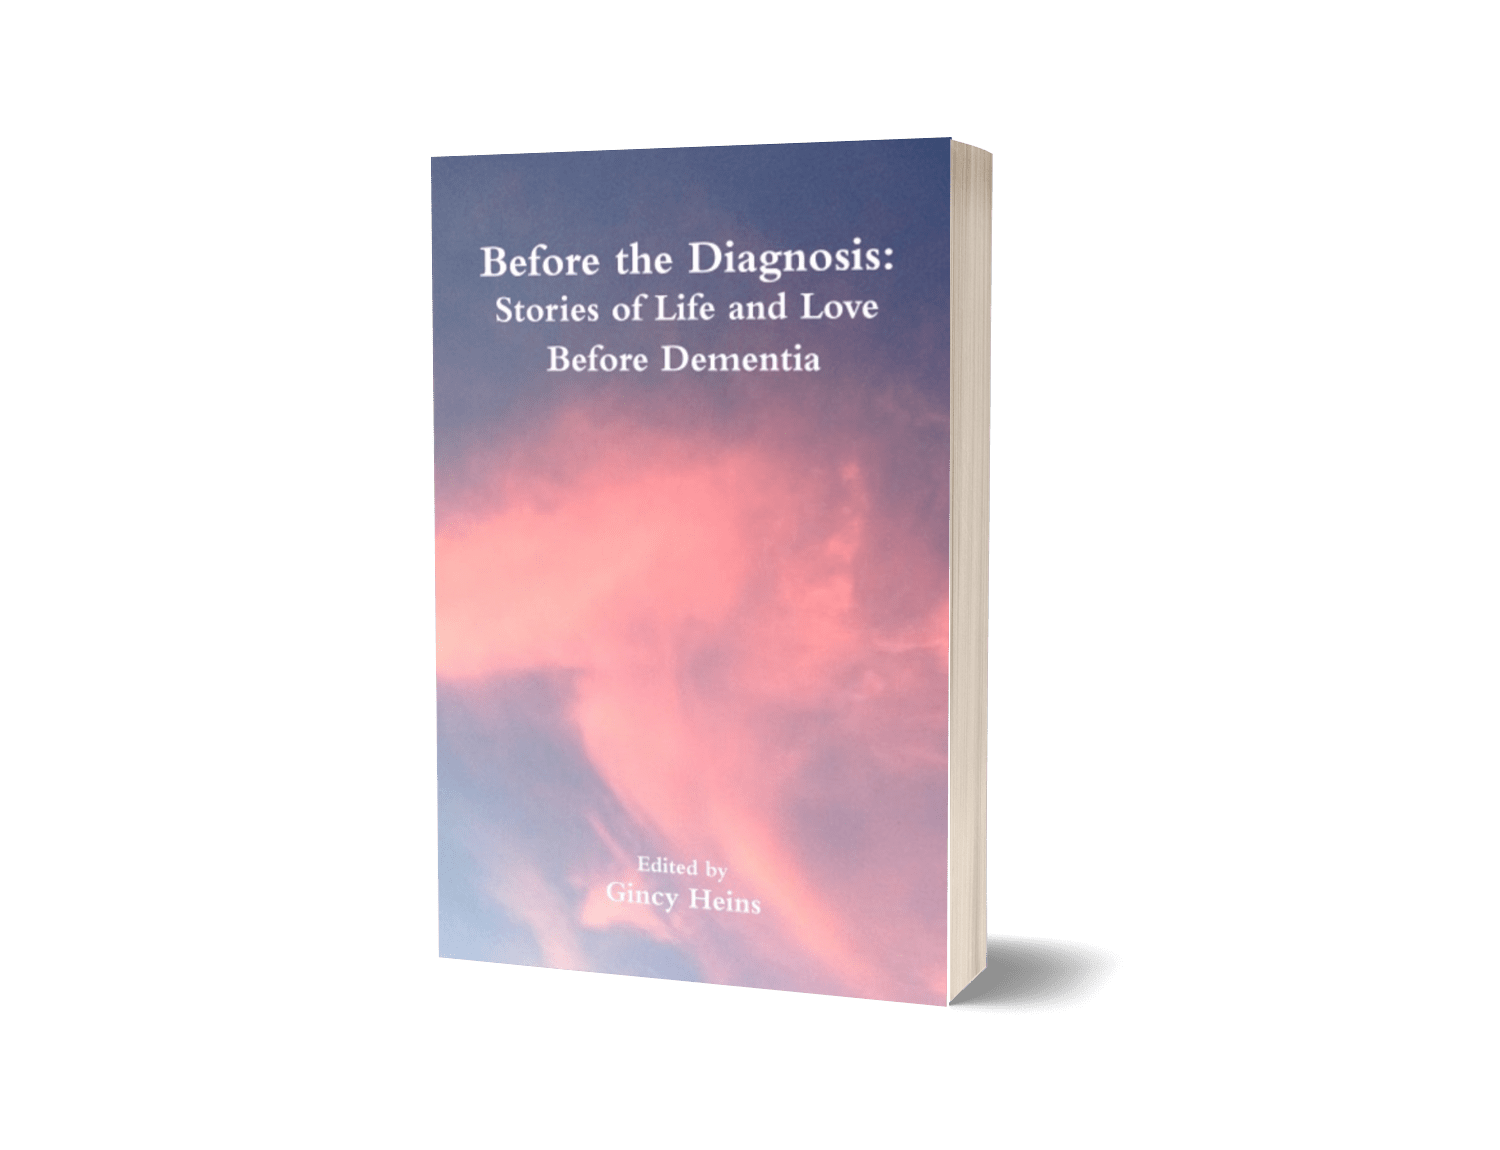 Before the Diagnosis: Stories of Life and Love Before Dementia